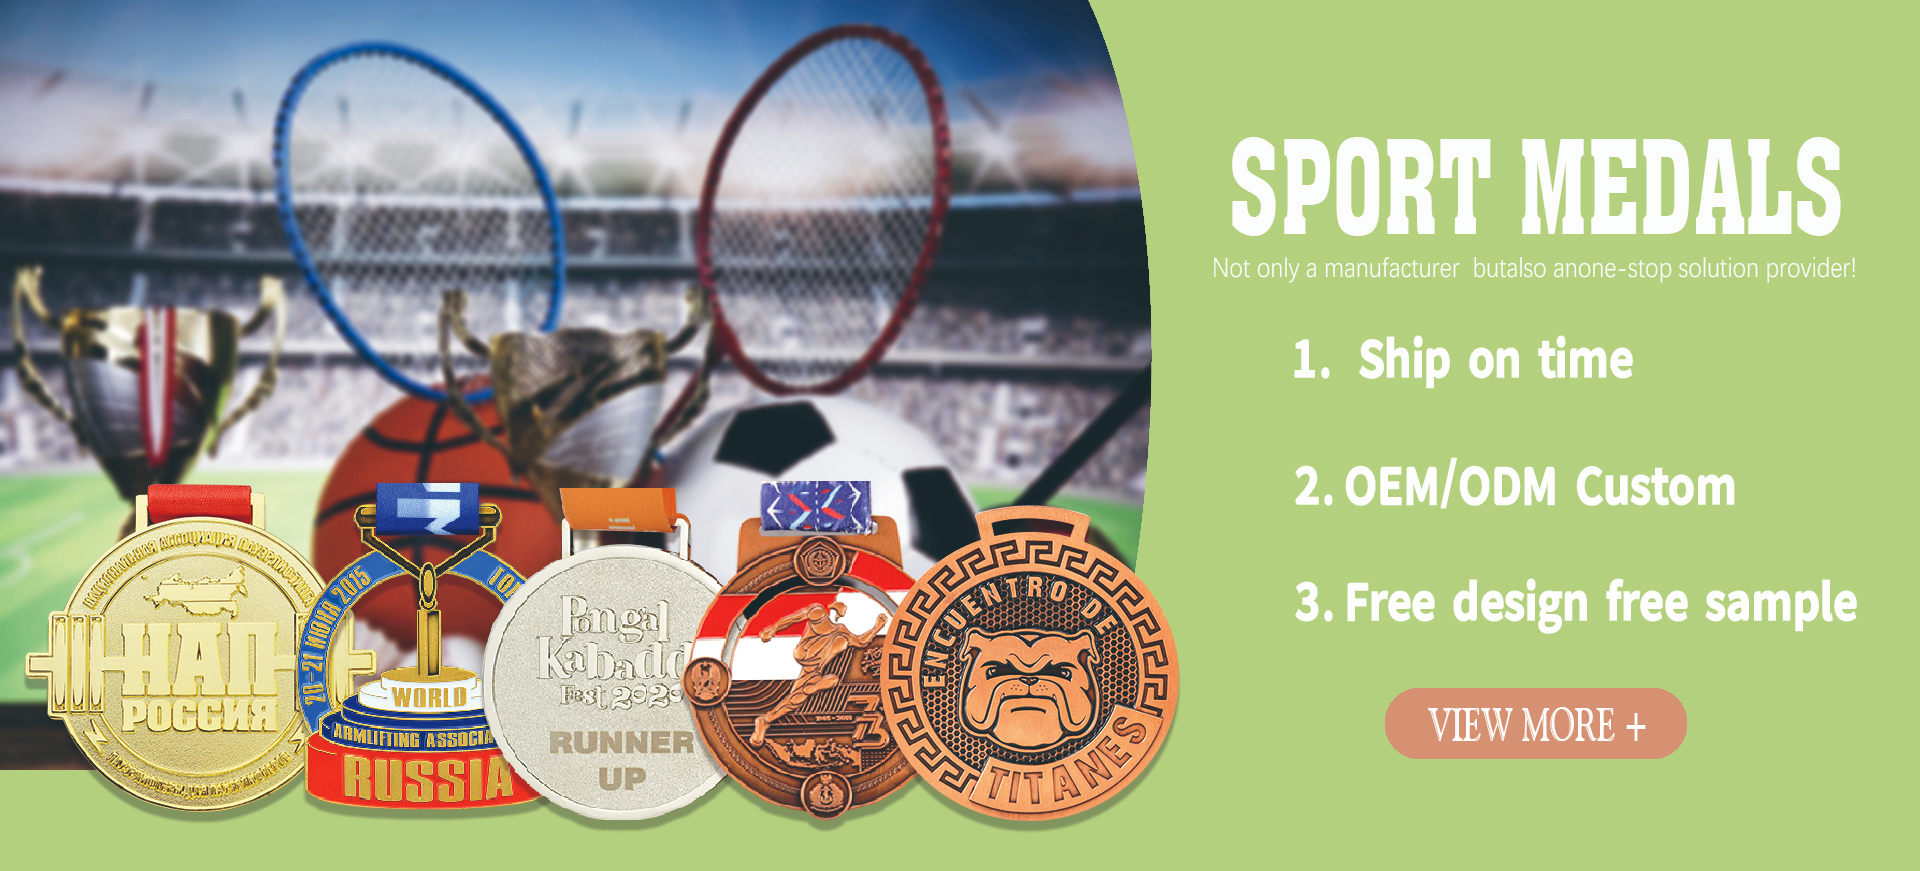 Why Choose Artigifts for Your Custom Sports Medals